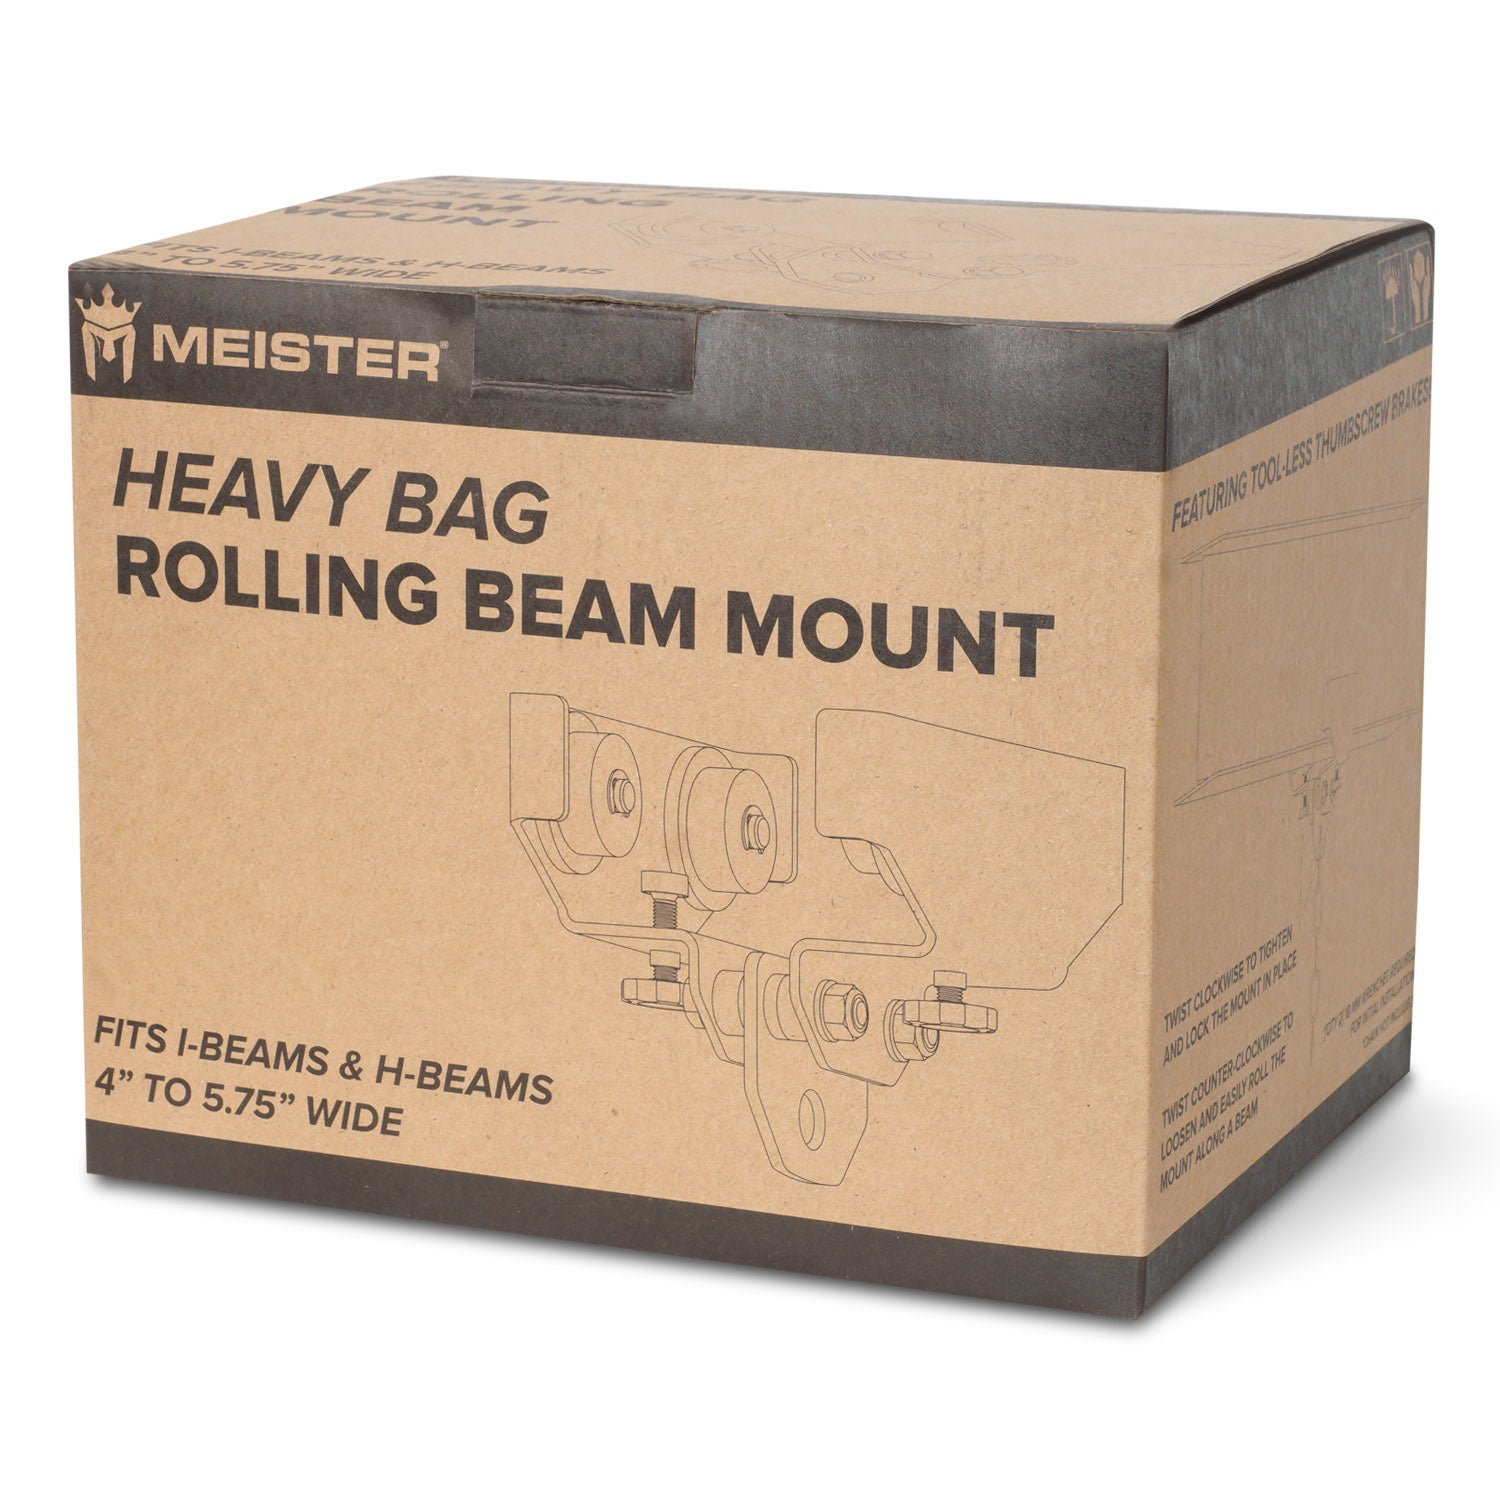 Meister Heavy Bag Rolling Beam Mount for I-Beams & H-Beams (4" - 5.75")